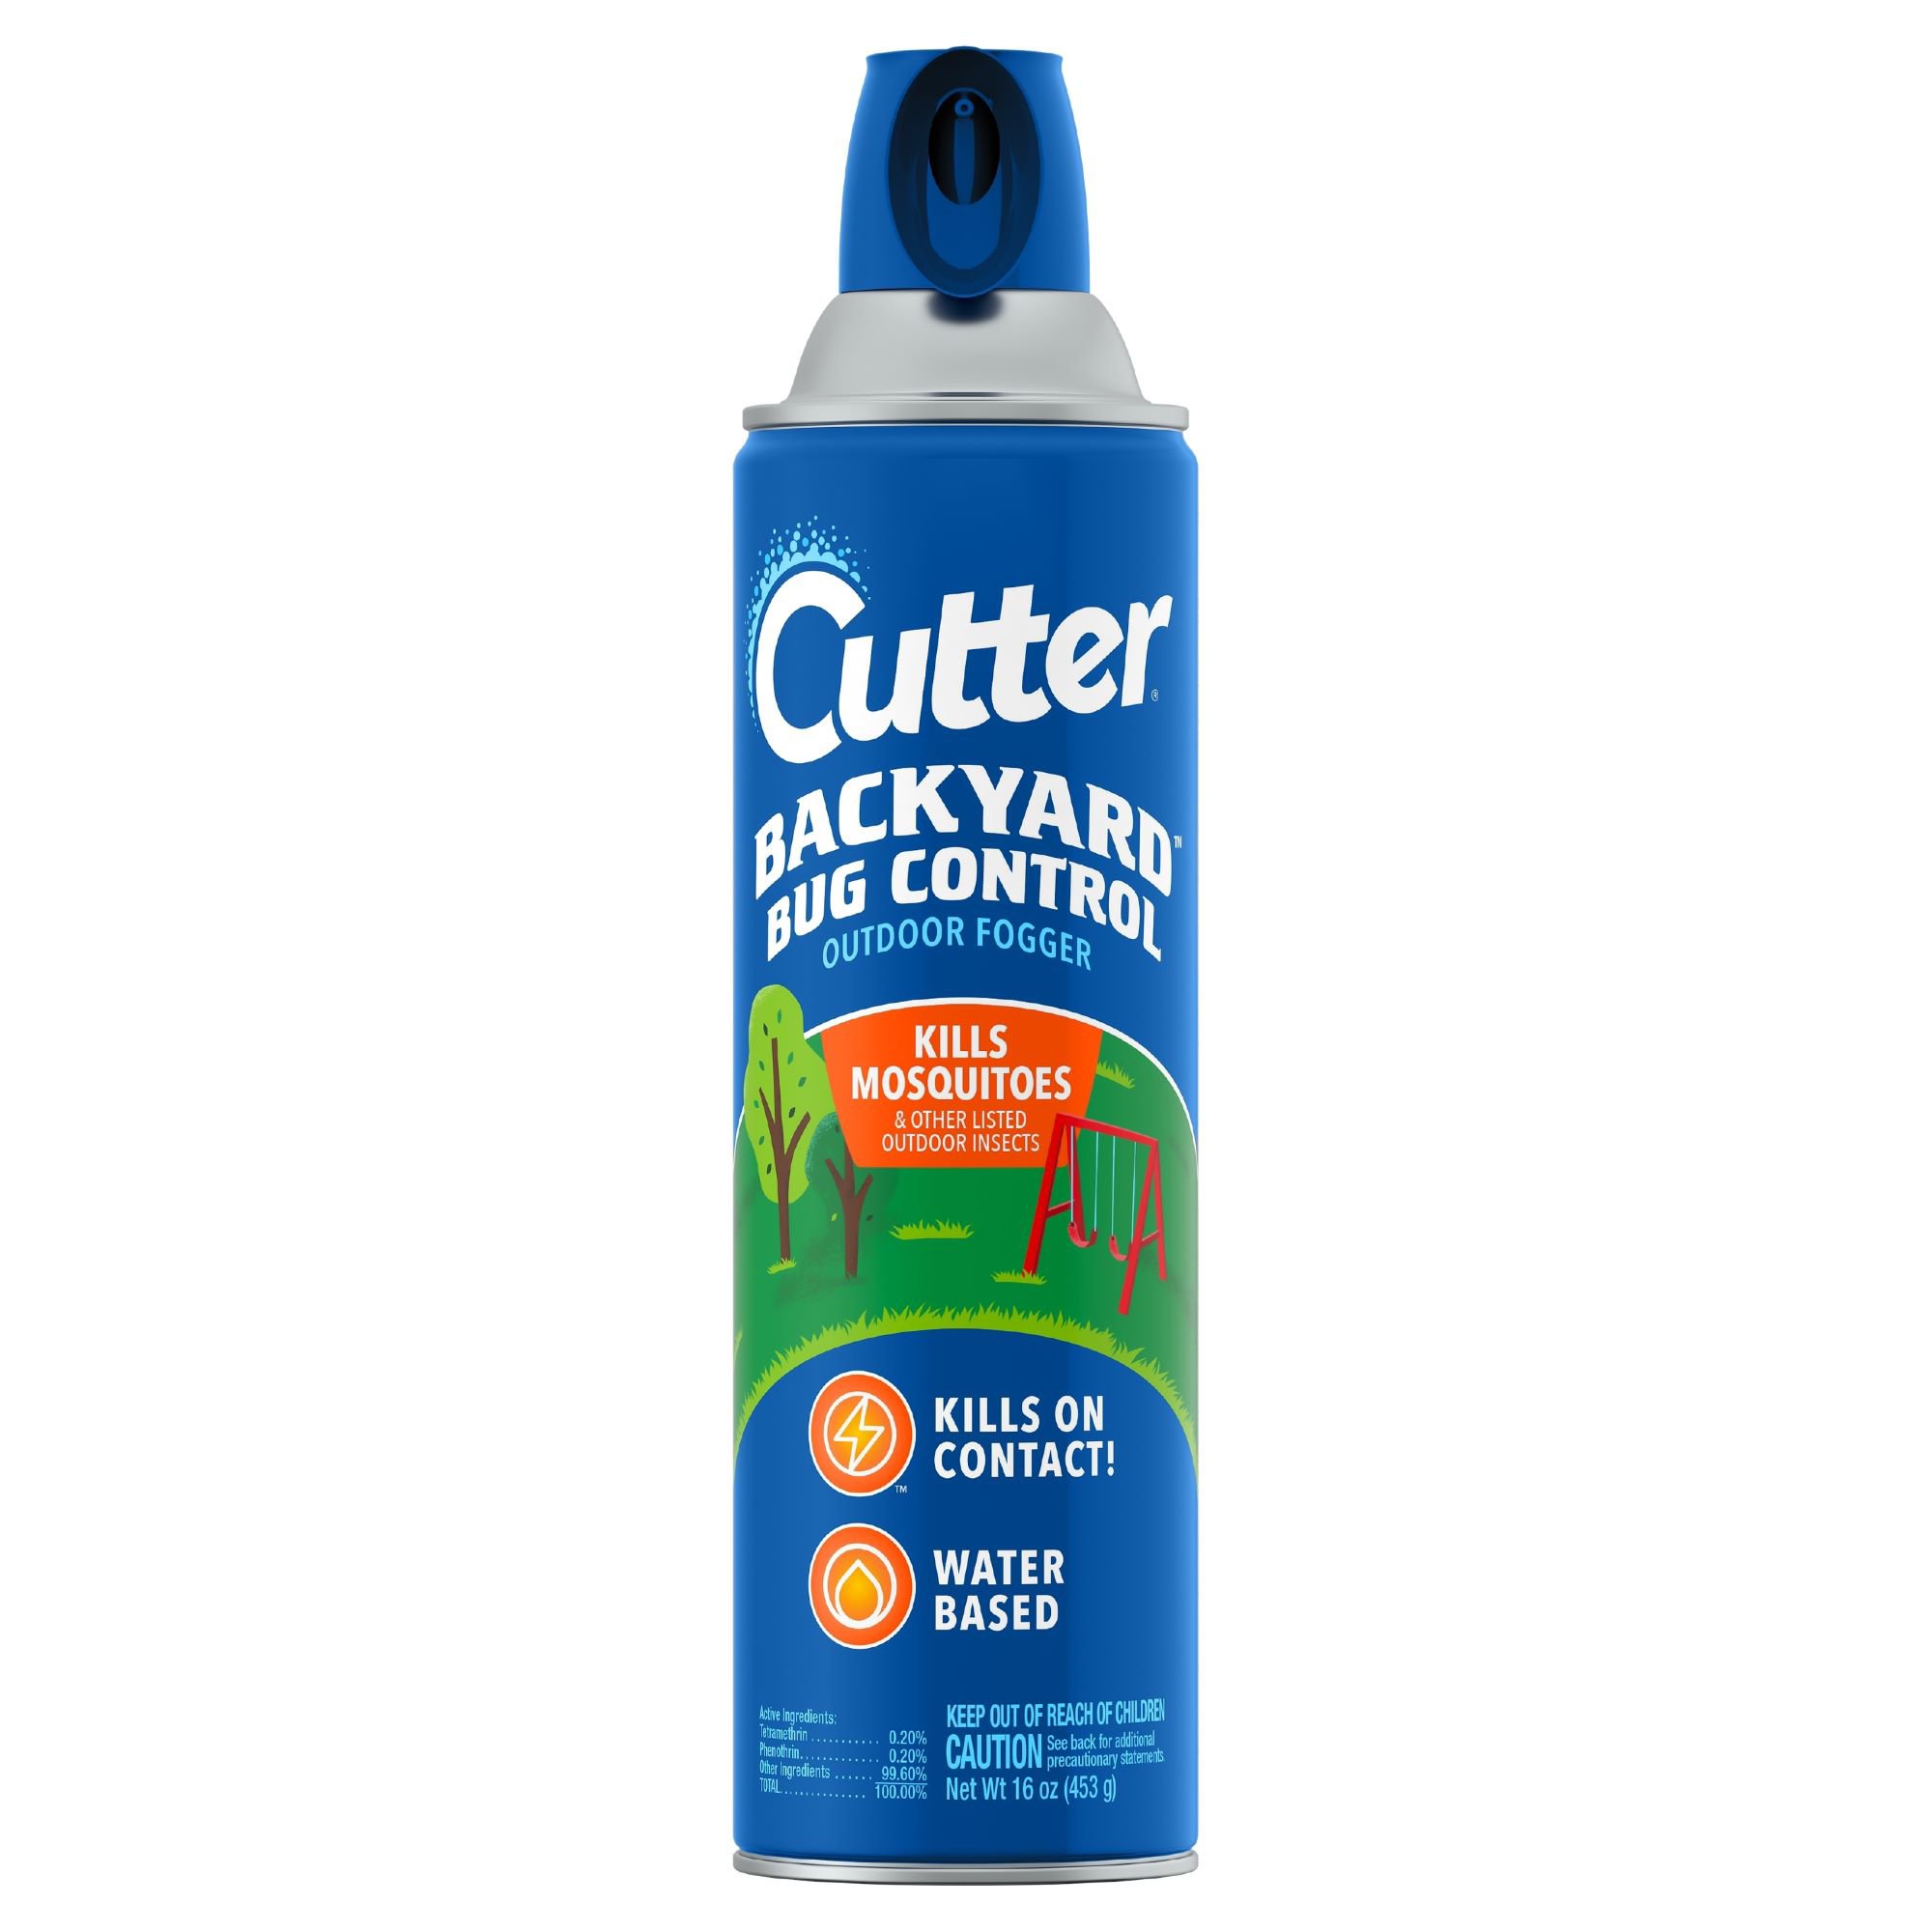 Cutter Backyard Bug Control Outdoor Fogger Shop Insect Killers At H E B